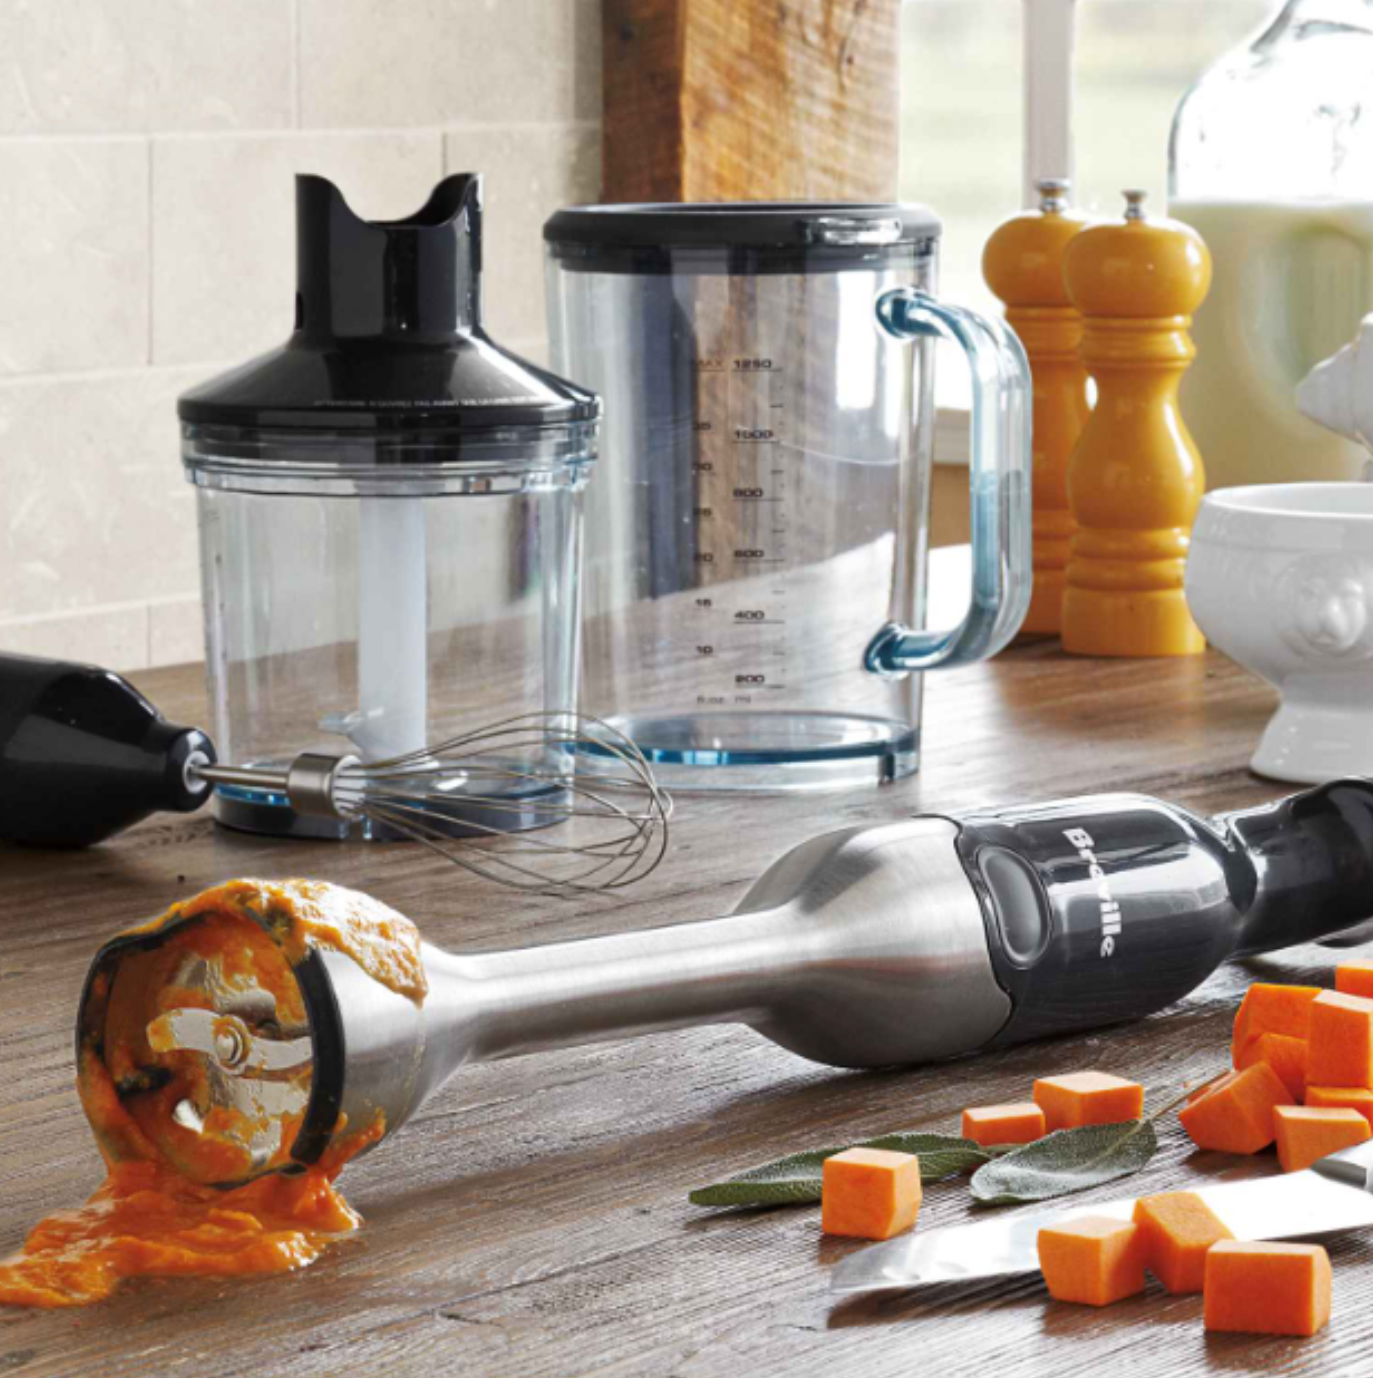 Blender cleaning tips: Cleaning Your Immersion Blender